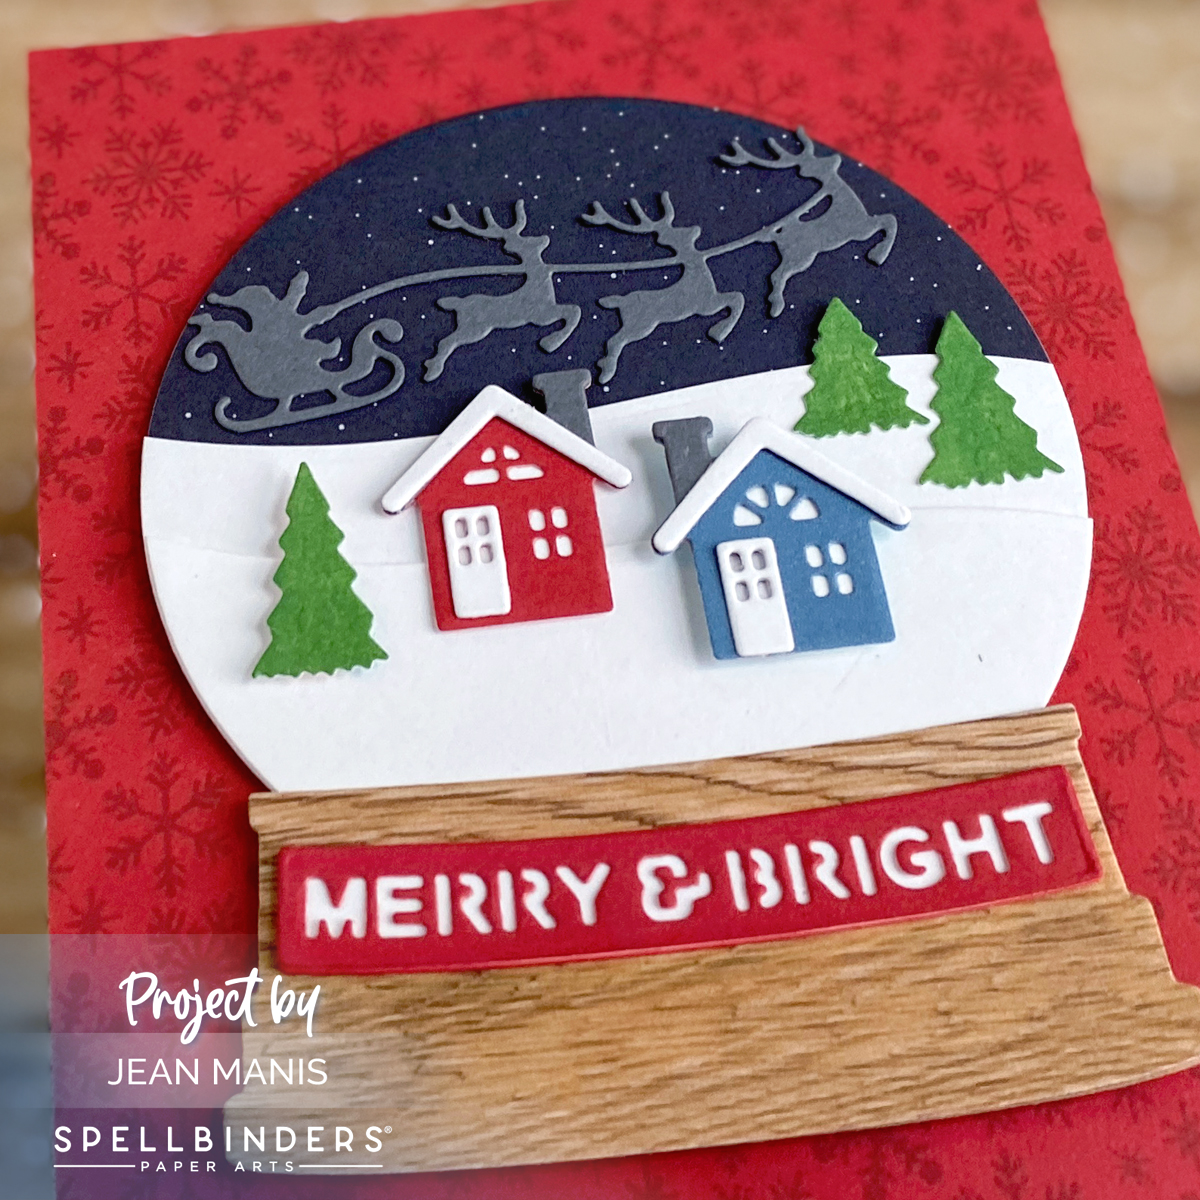 Spellbinders | Fave Holiday Products Blog Hop